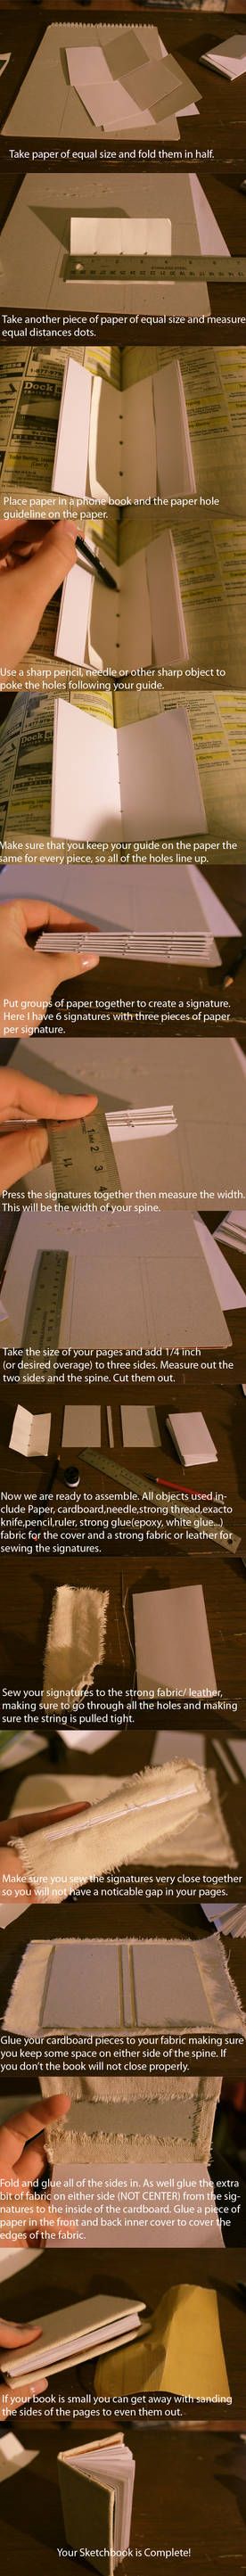 How to make a Sketchbook from scratch